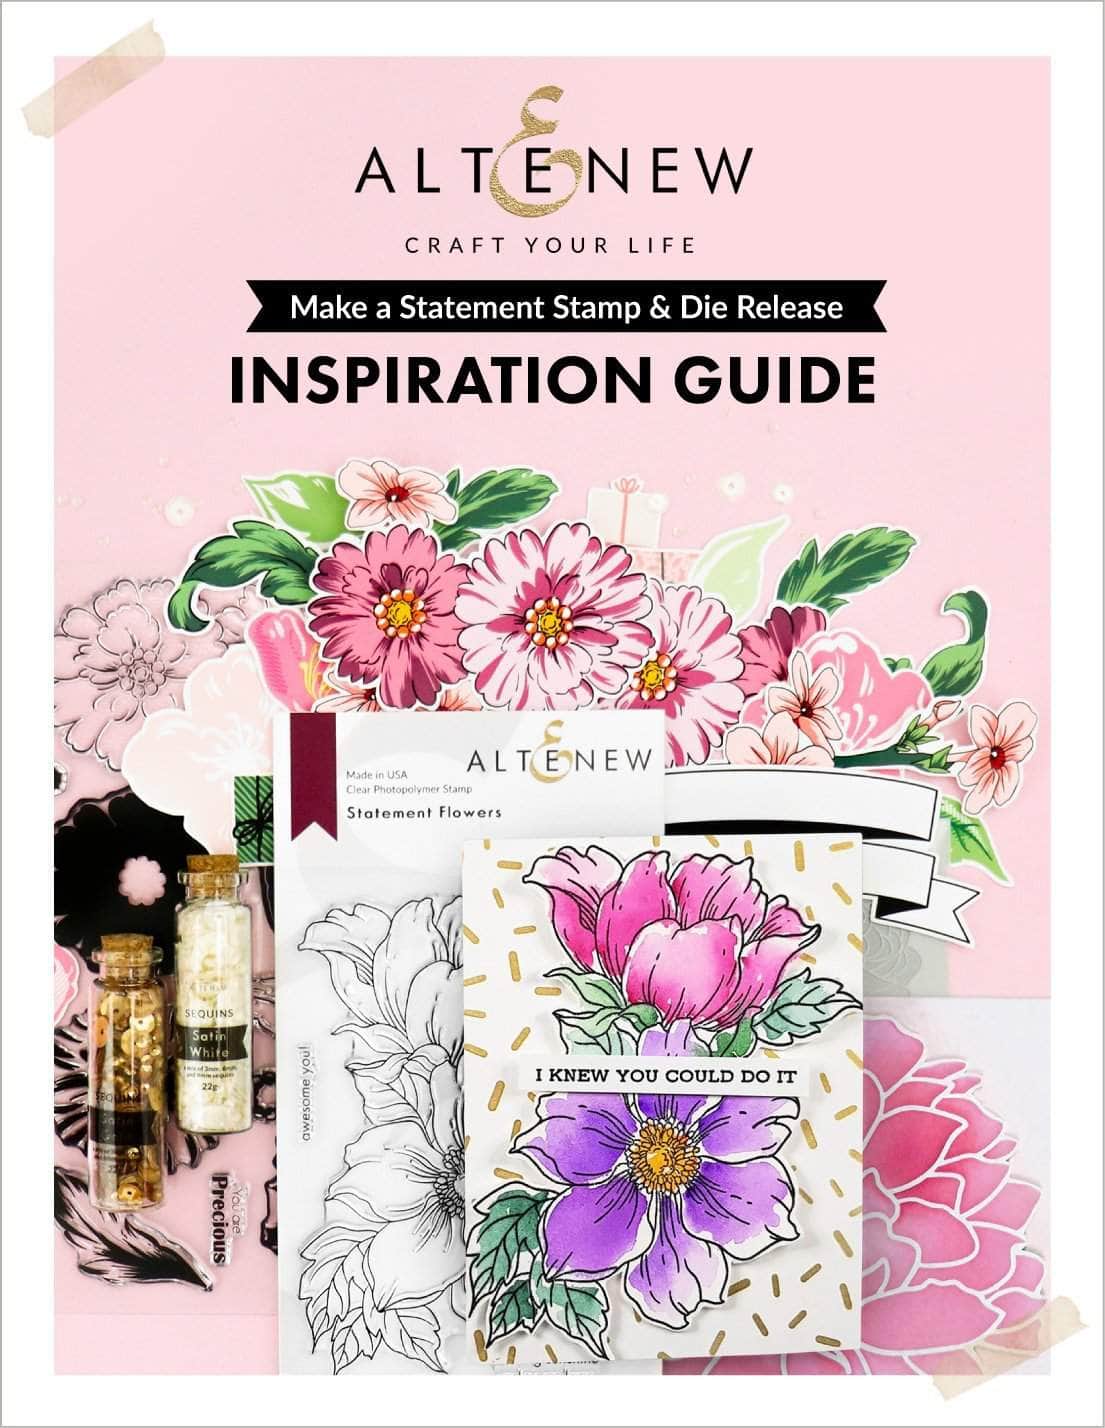 Printed Media Make a Statement Stamp & Die Release Inspiration Guide